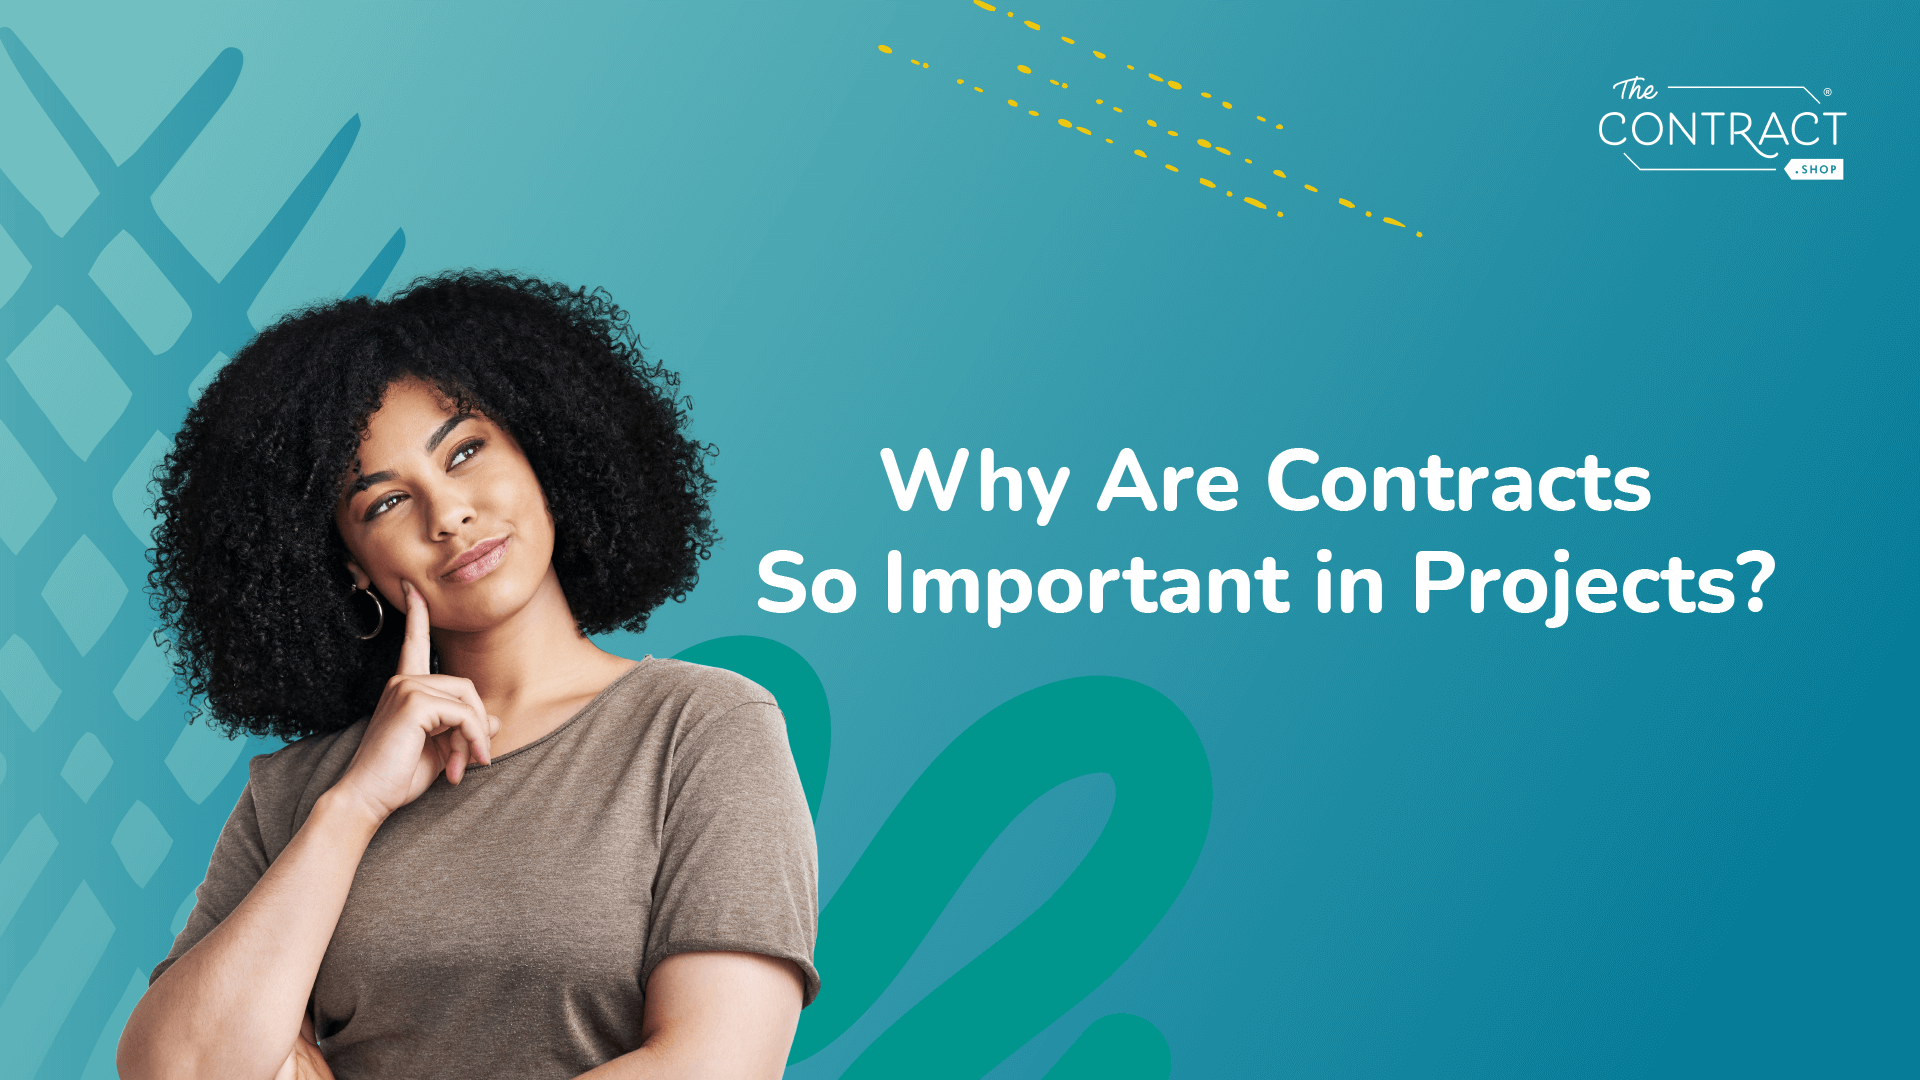 Why are Contracts So Important in Projects?